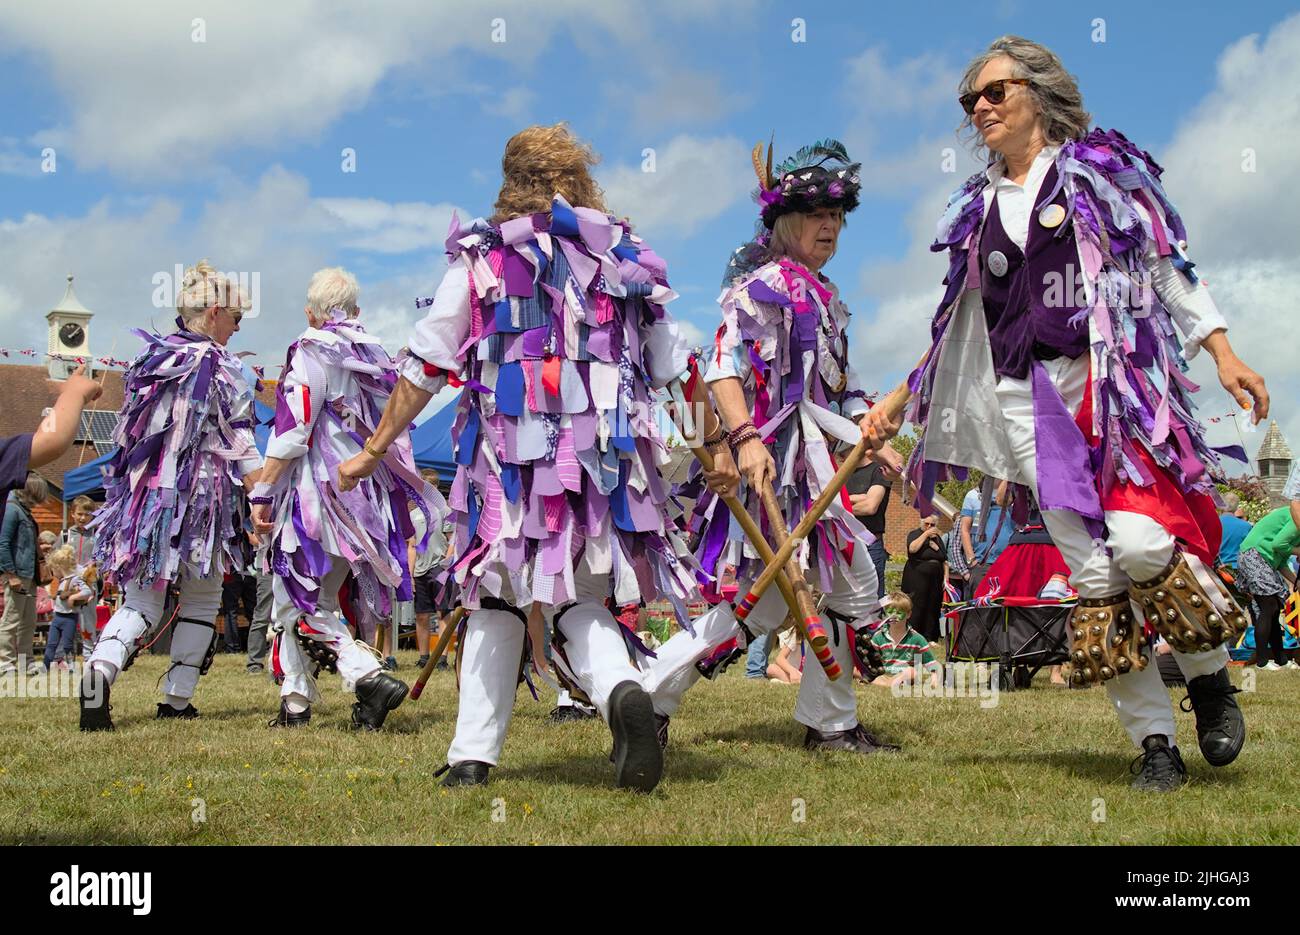 Morris Dancers in Clothes Made of Purple Rags Dancing with Sticks, New Forest UK Foto de stock